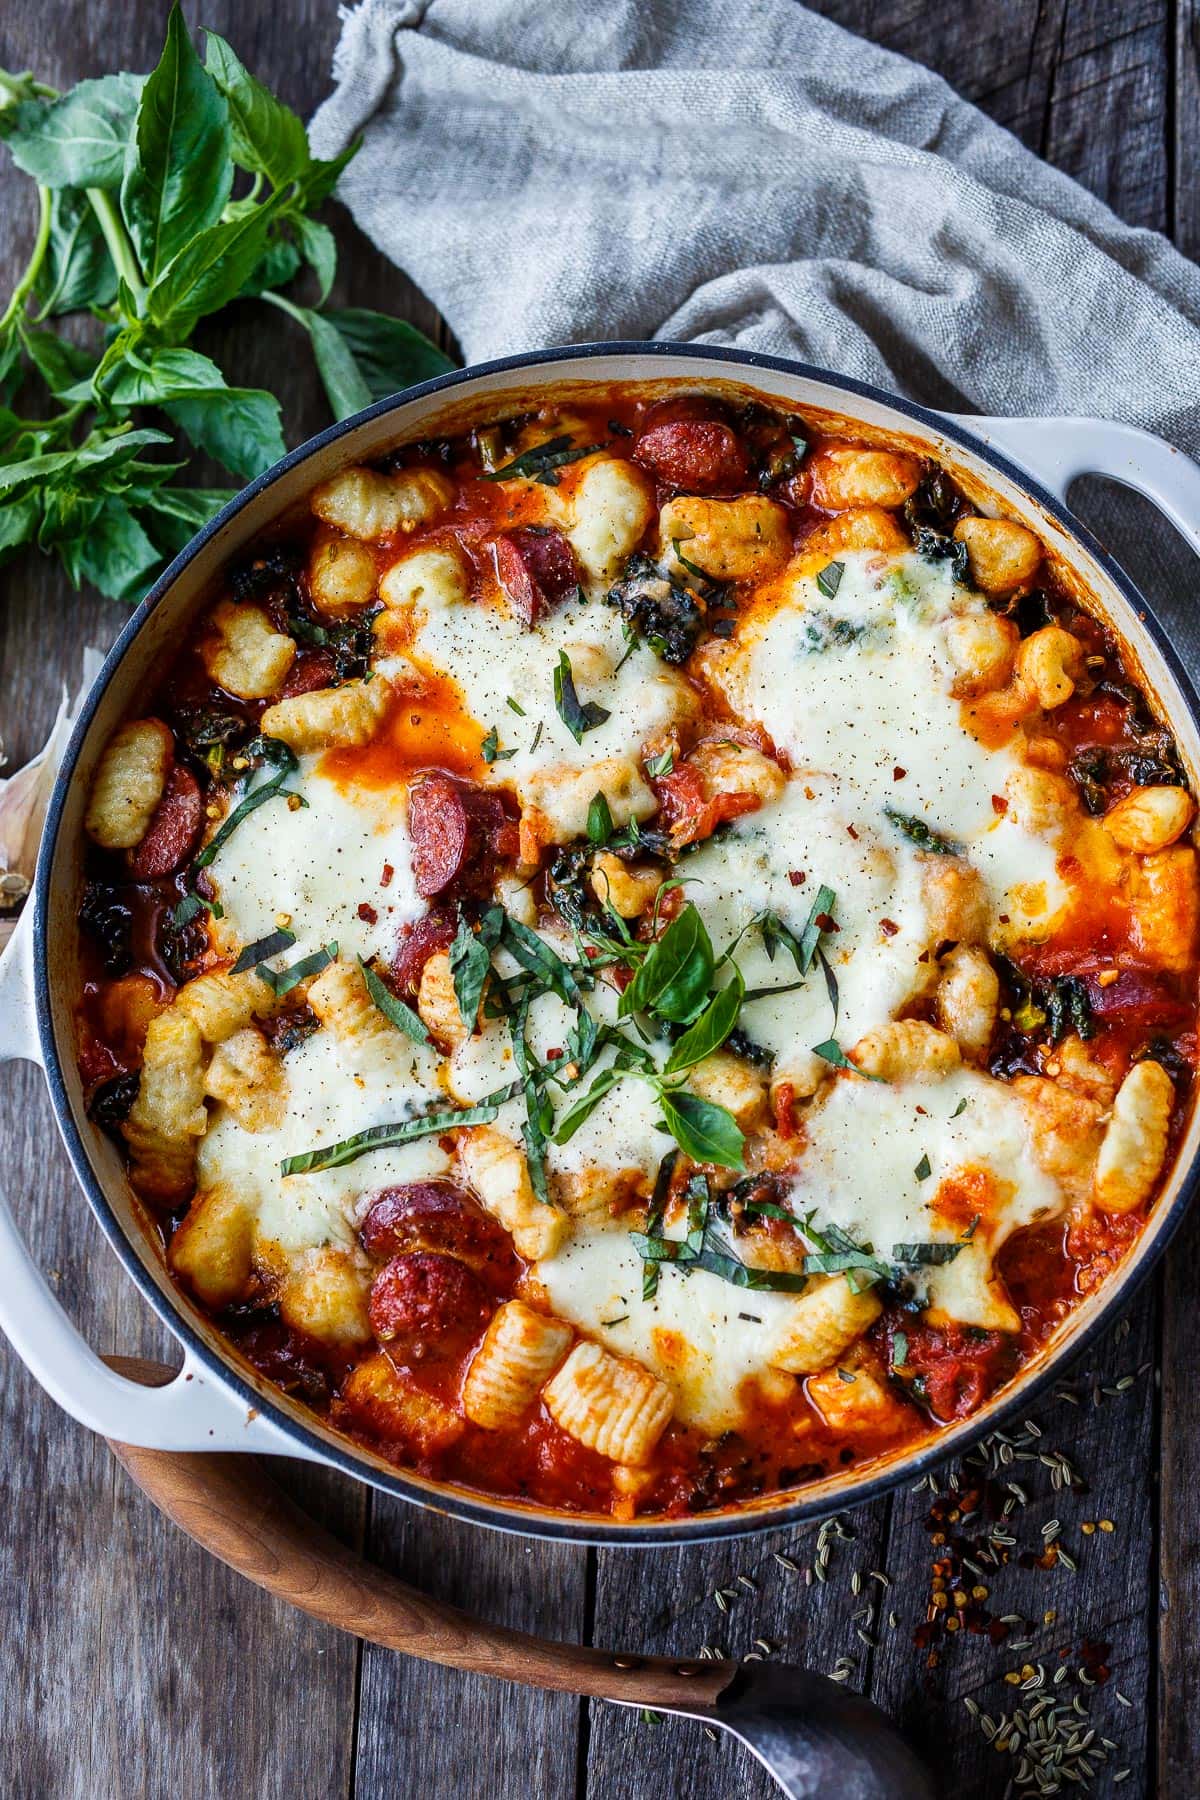 Baked Gnocchi with tomato sauce, kale, Italian sausage and melty mozzarella cheese - a  delicious one-pan meal that can be made in 30 minutes. 